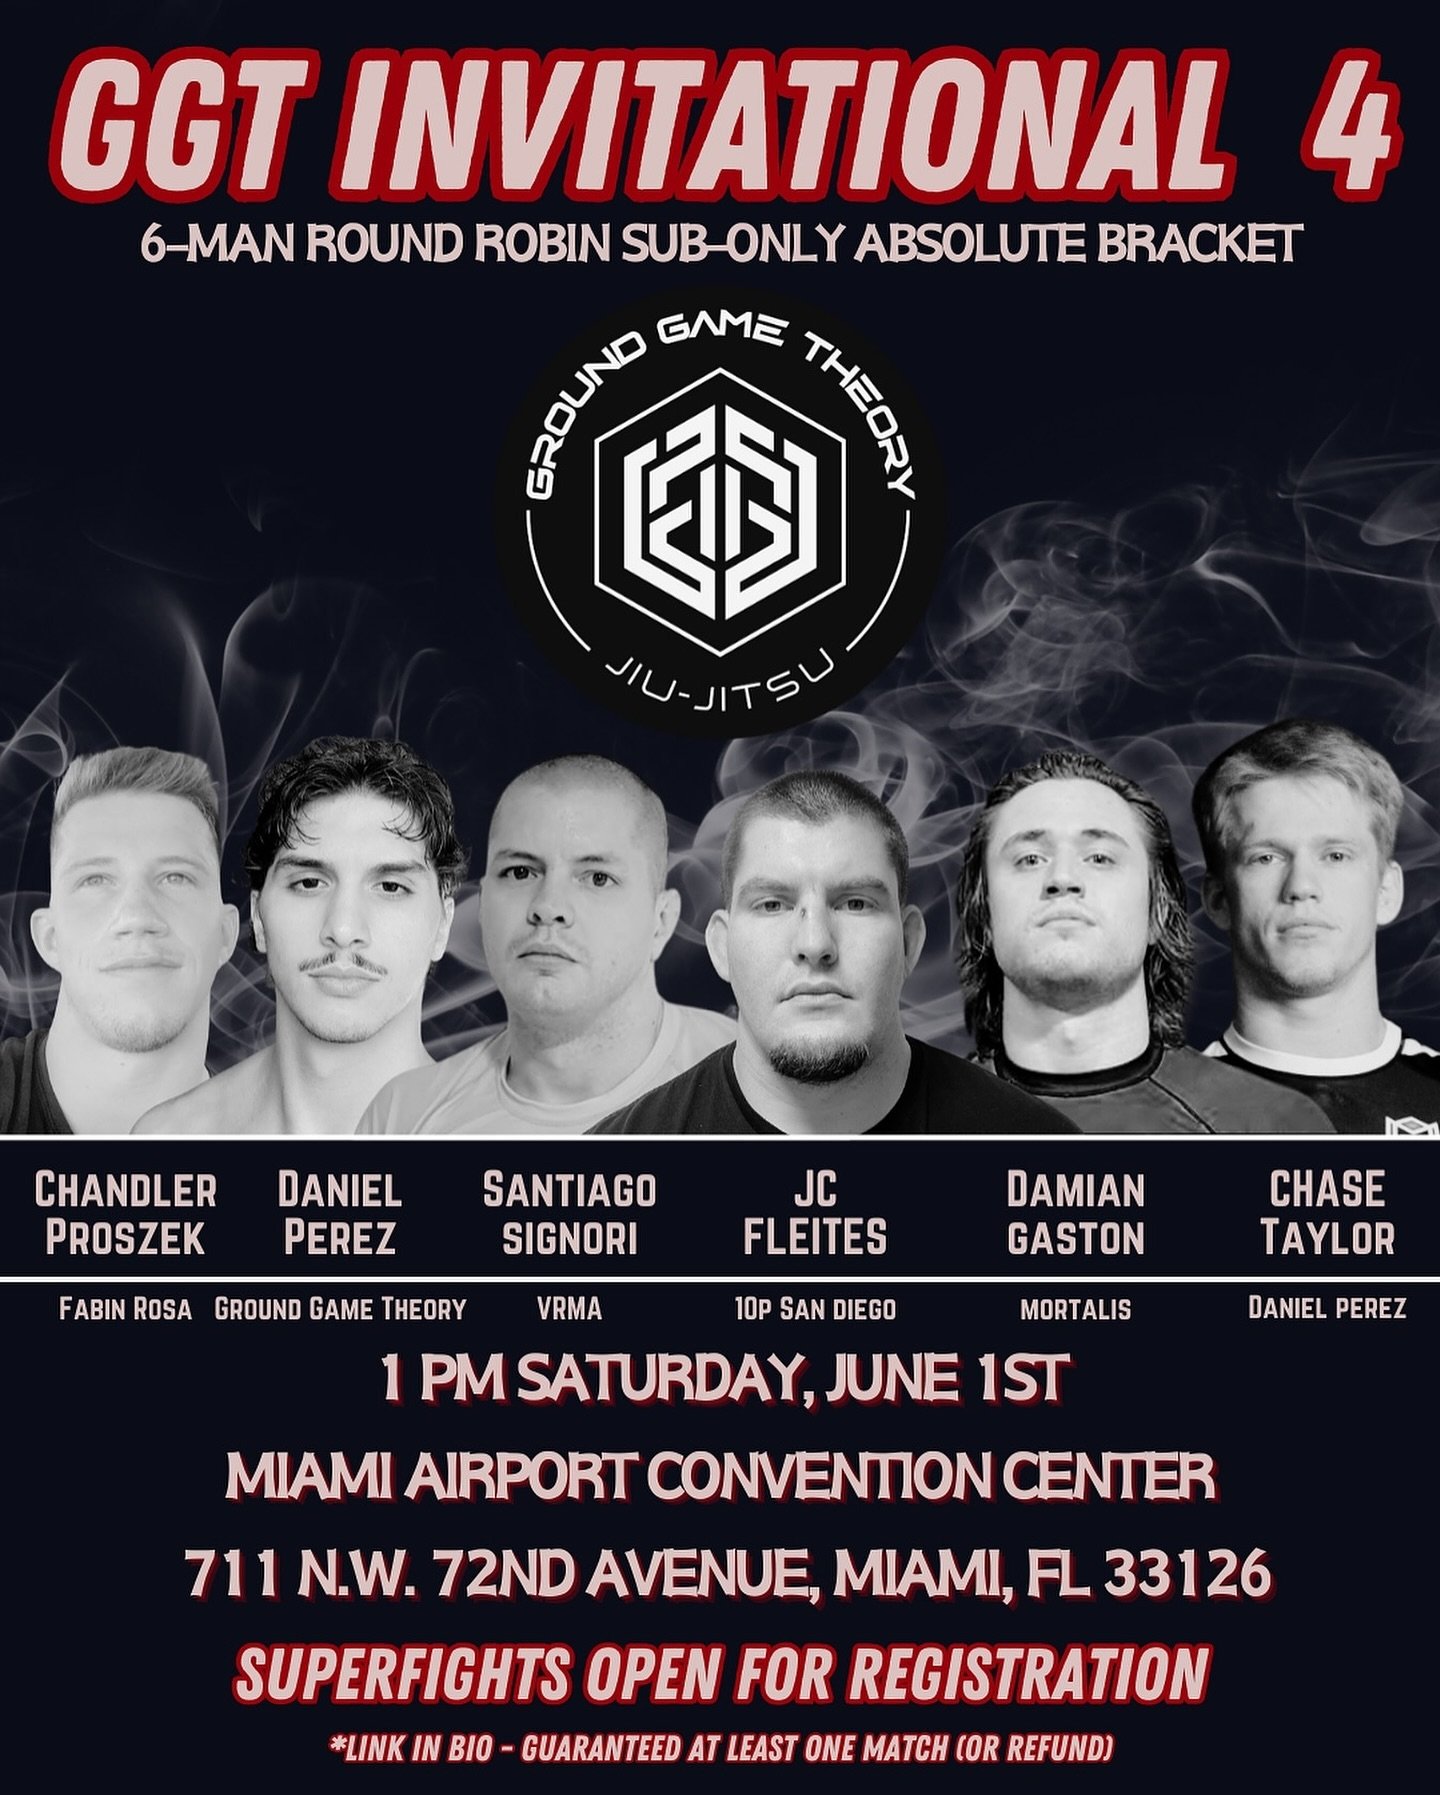 Can&rsquo;t get enough #JiuJitsu?
Join us on June 1st at 1 PM at the Miami International Fitness Expo&nbsp;for @groundgametheory 4th submission only invitational 🏆

Featuring a 6-man round robin absolute bracket where each athlete battles it out for